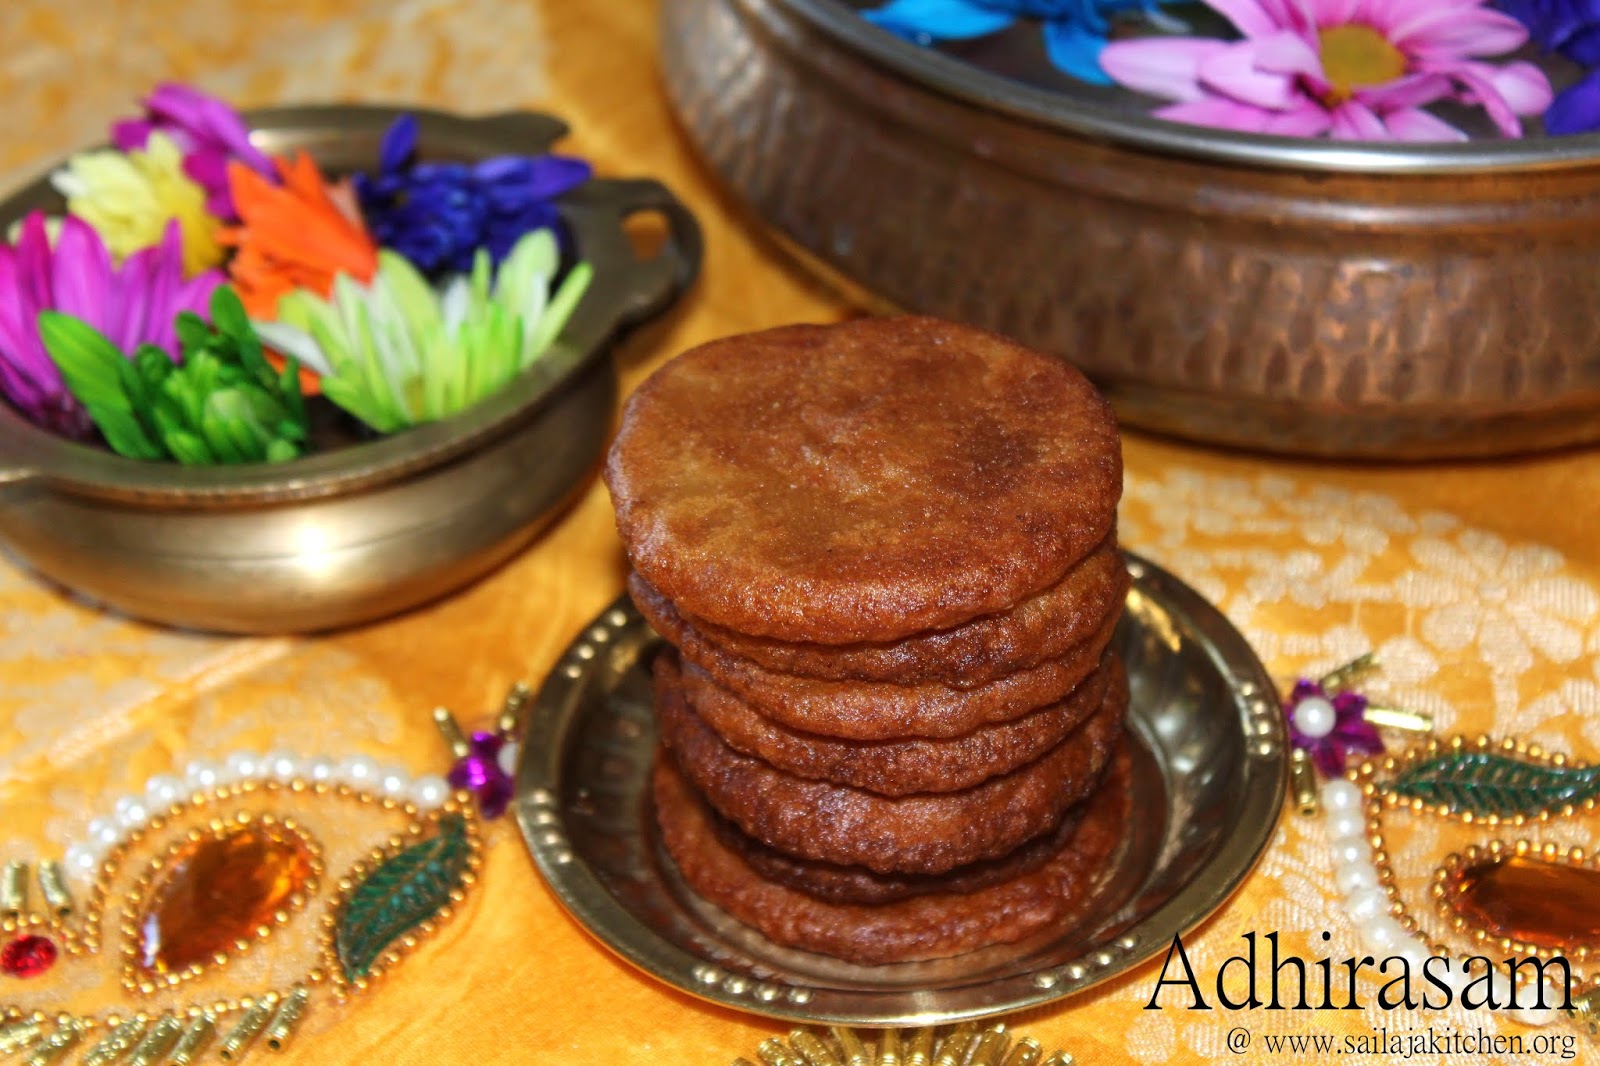 Sailaja Kitchen...A site for all food lovers!: Adhirasam Recipe Using ...